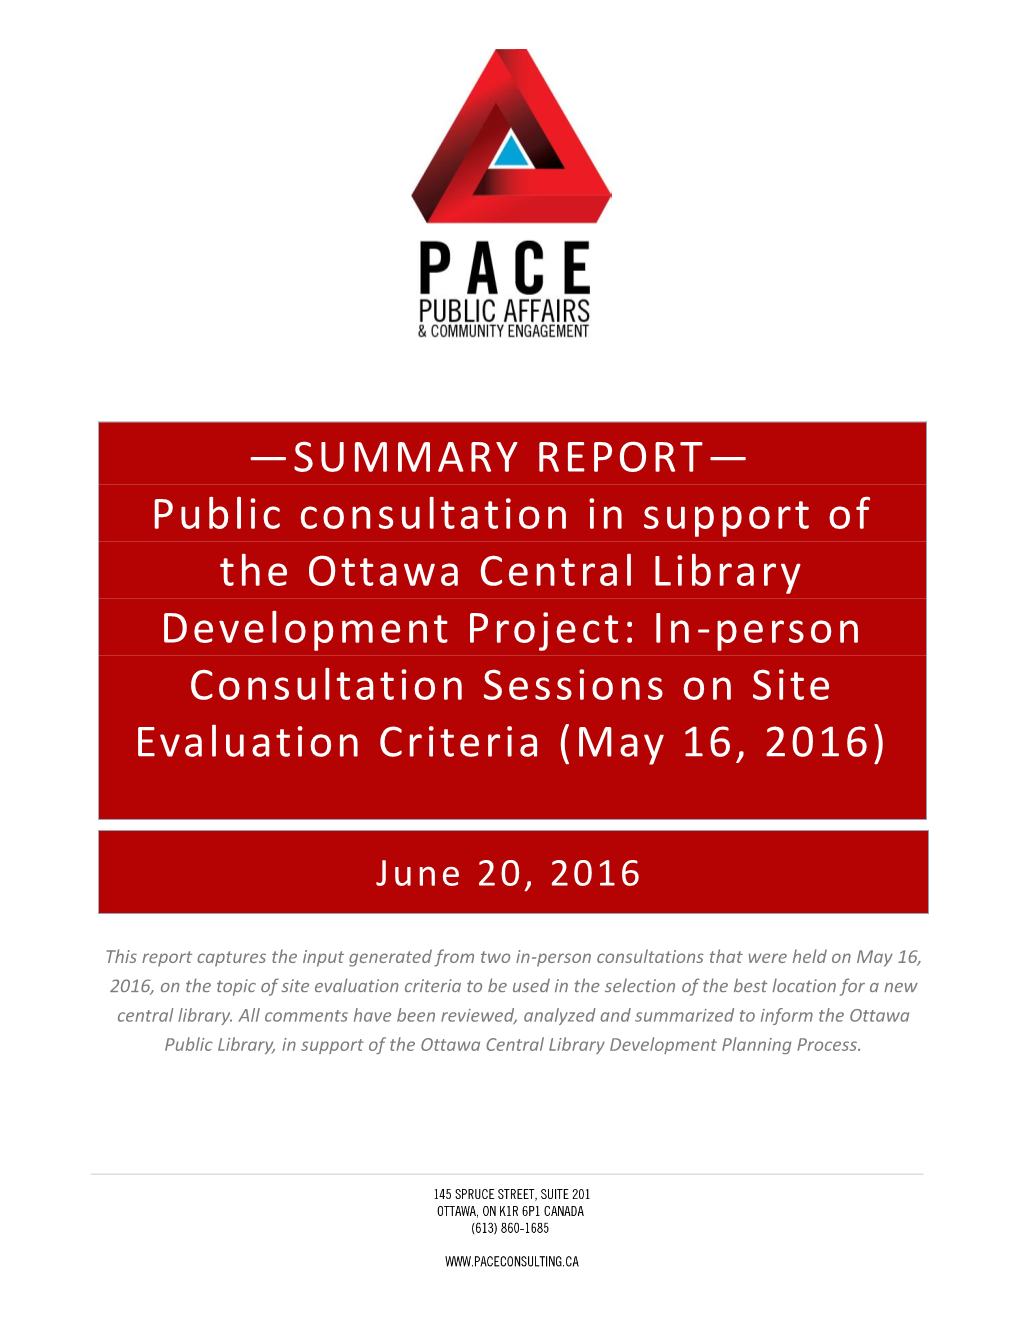 Public Consultation in Support of the Ottawa Central Library Development Project: In-Person Consultation Sessions on Site Evaluation Criteria (May 16, 2016)